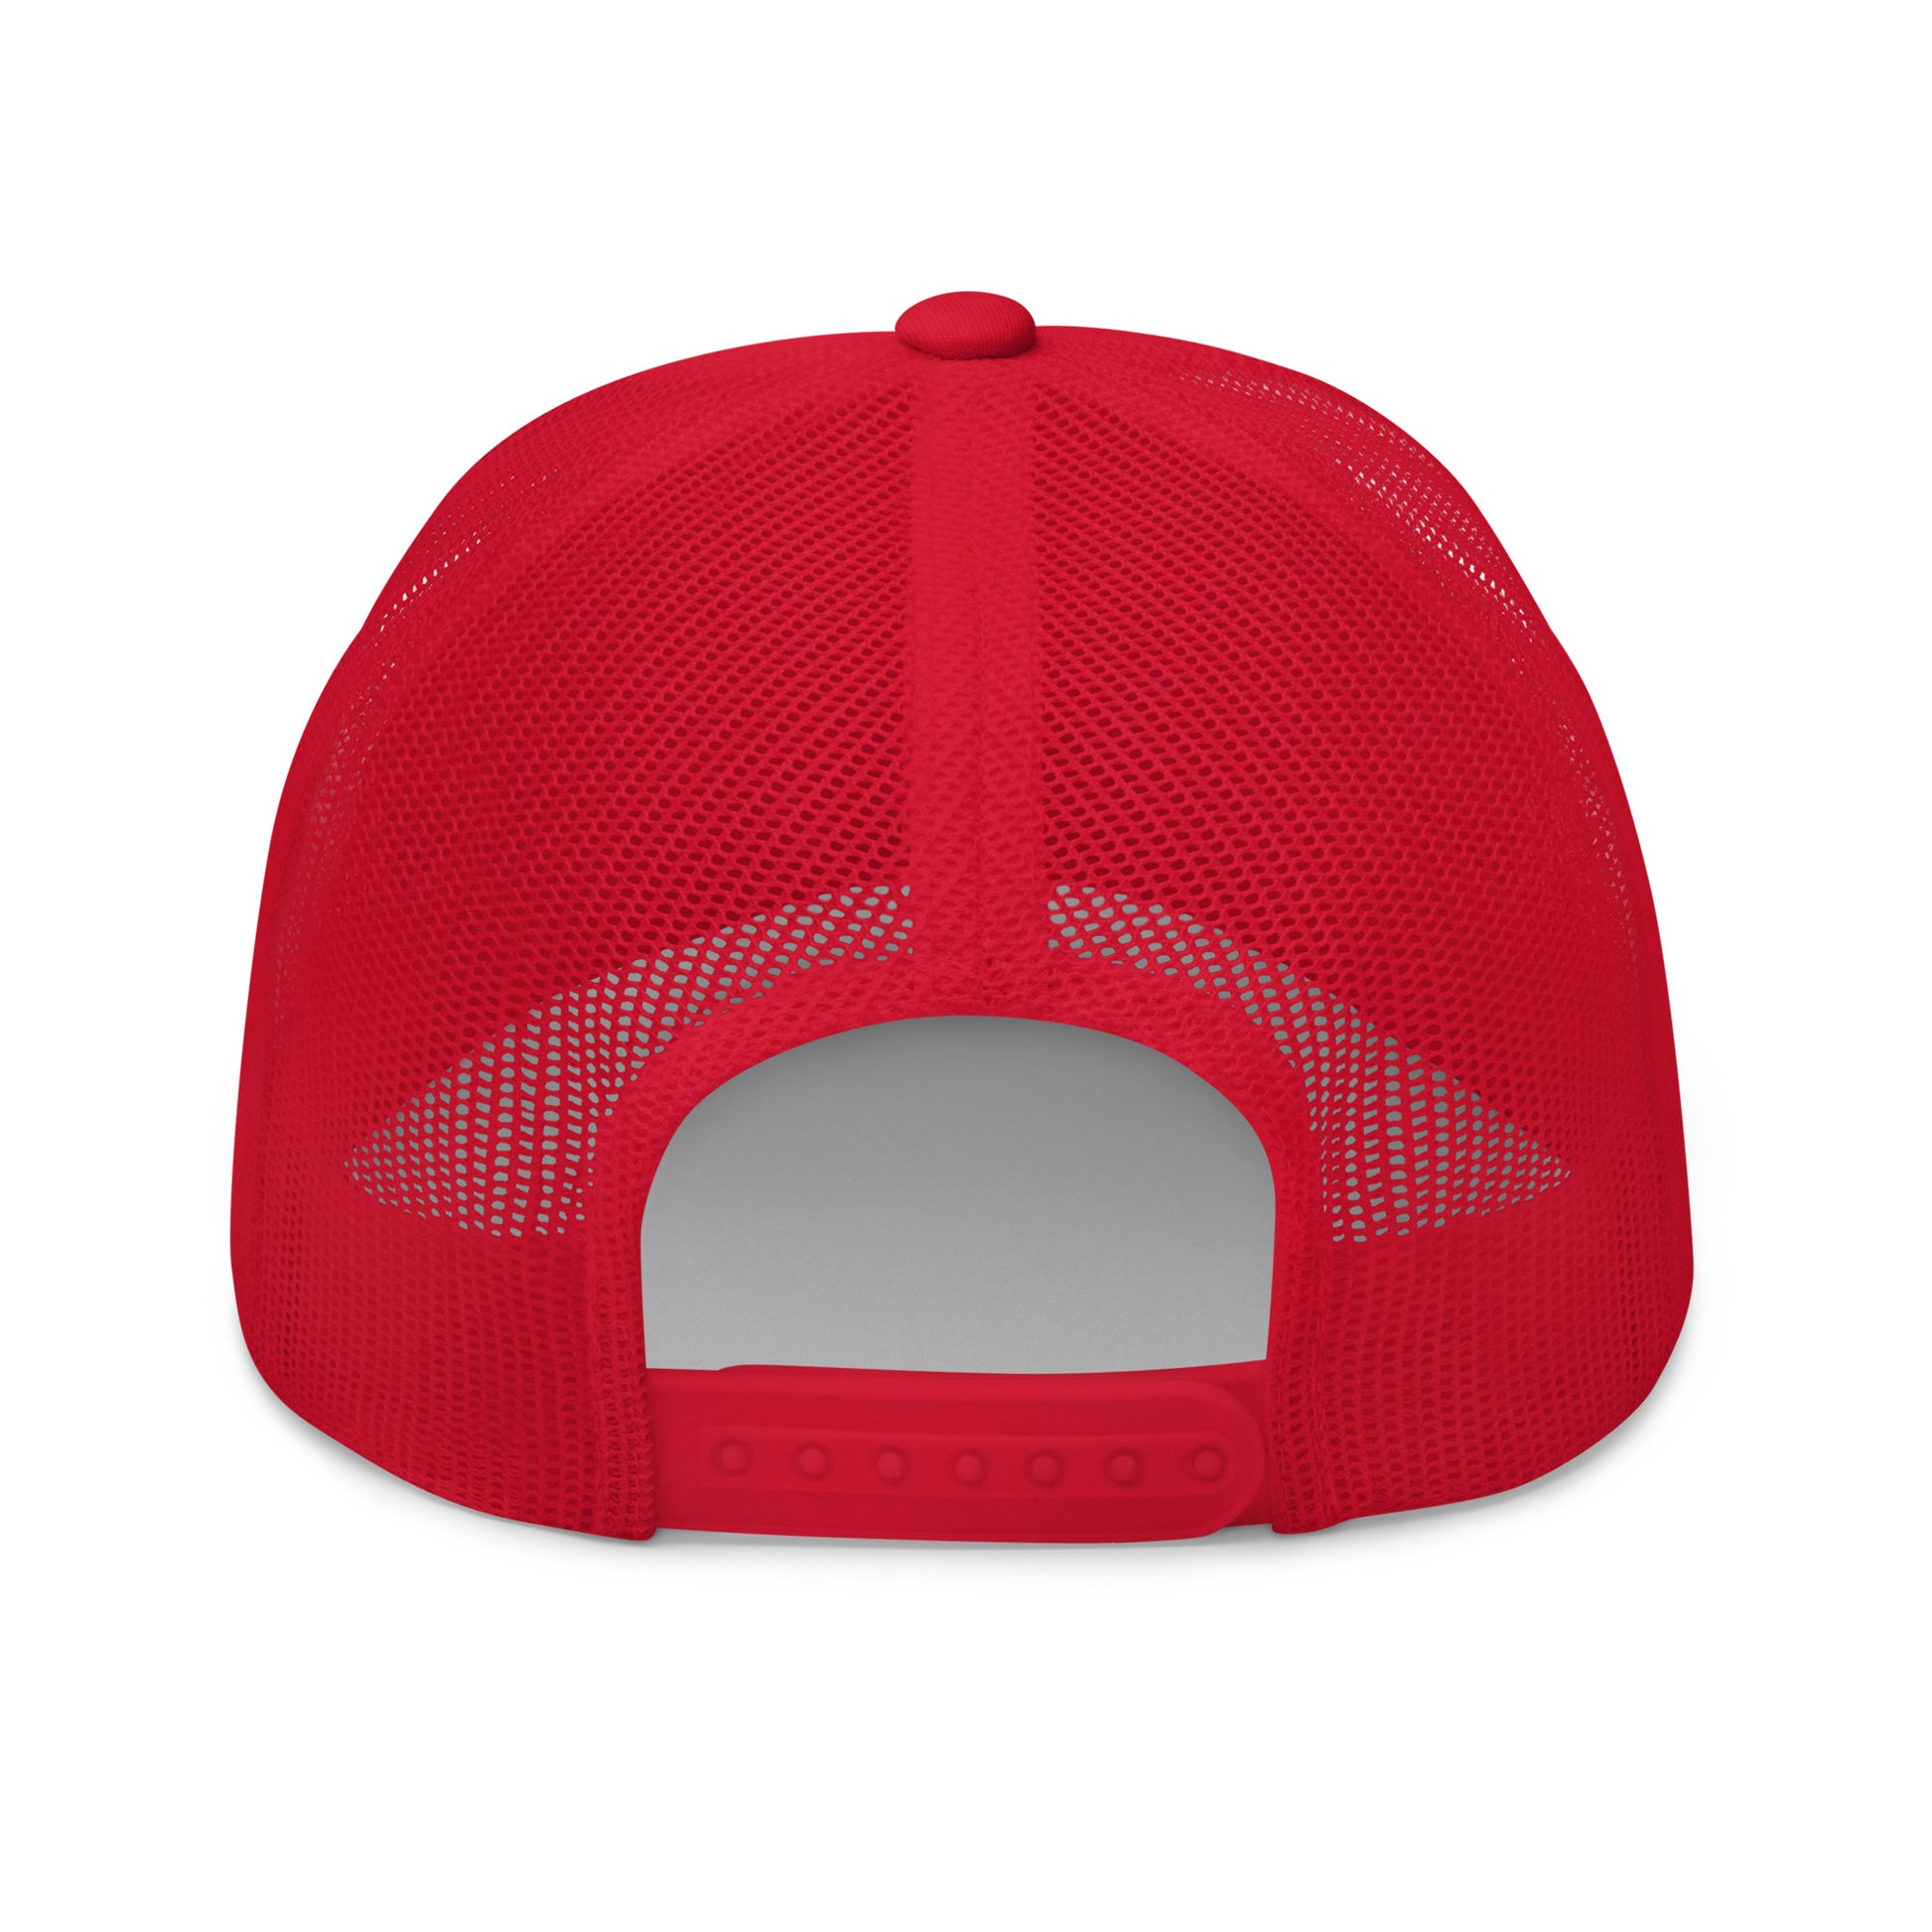 Maple Leaf Trucker Hat - Red/White • YQB Quebec City • YHM Designs - Image 24